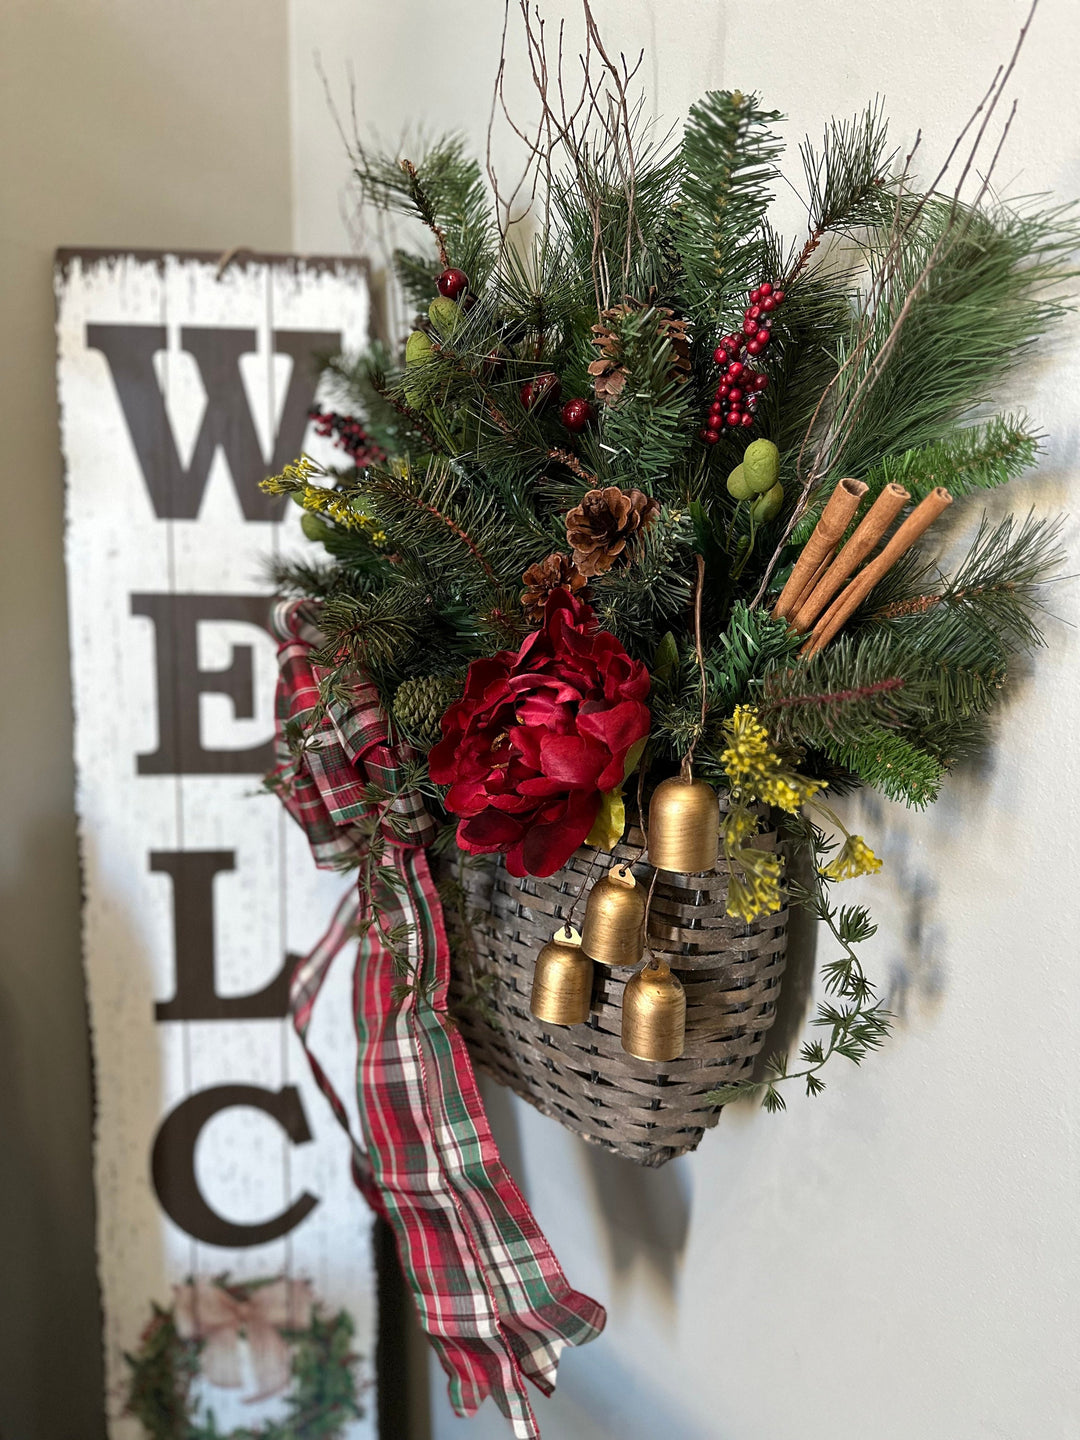 Winter Christmas front door basket wreath perfect for your porch or entryway! This basket has a stunning coordinating wreath.